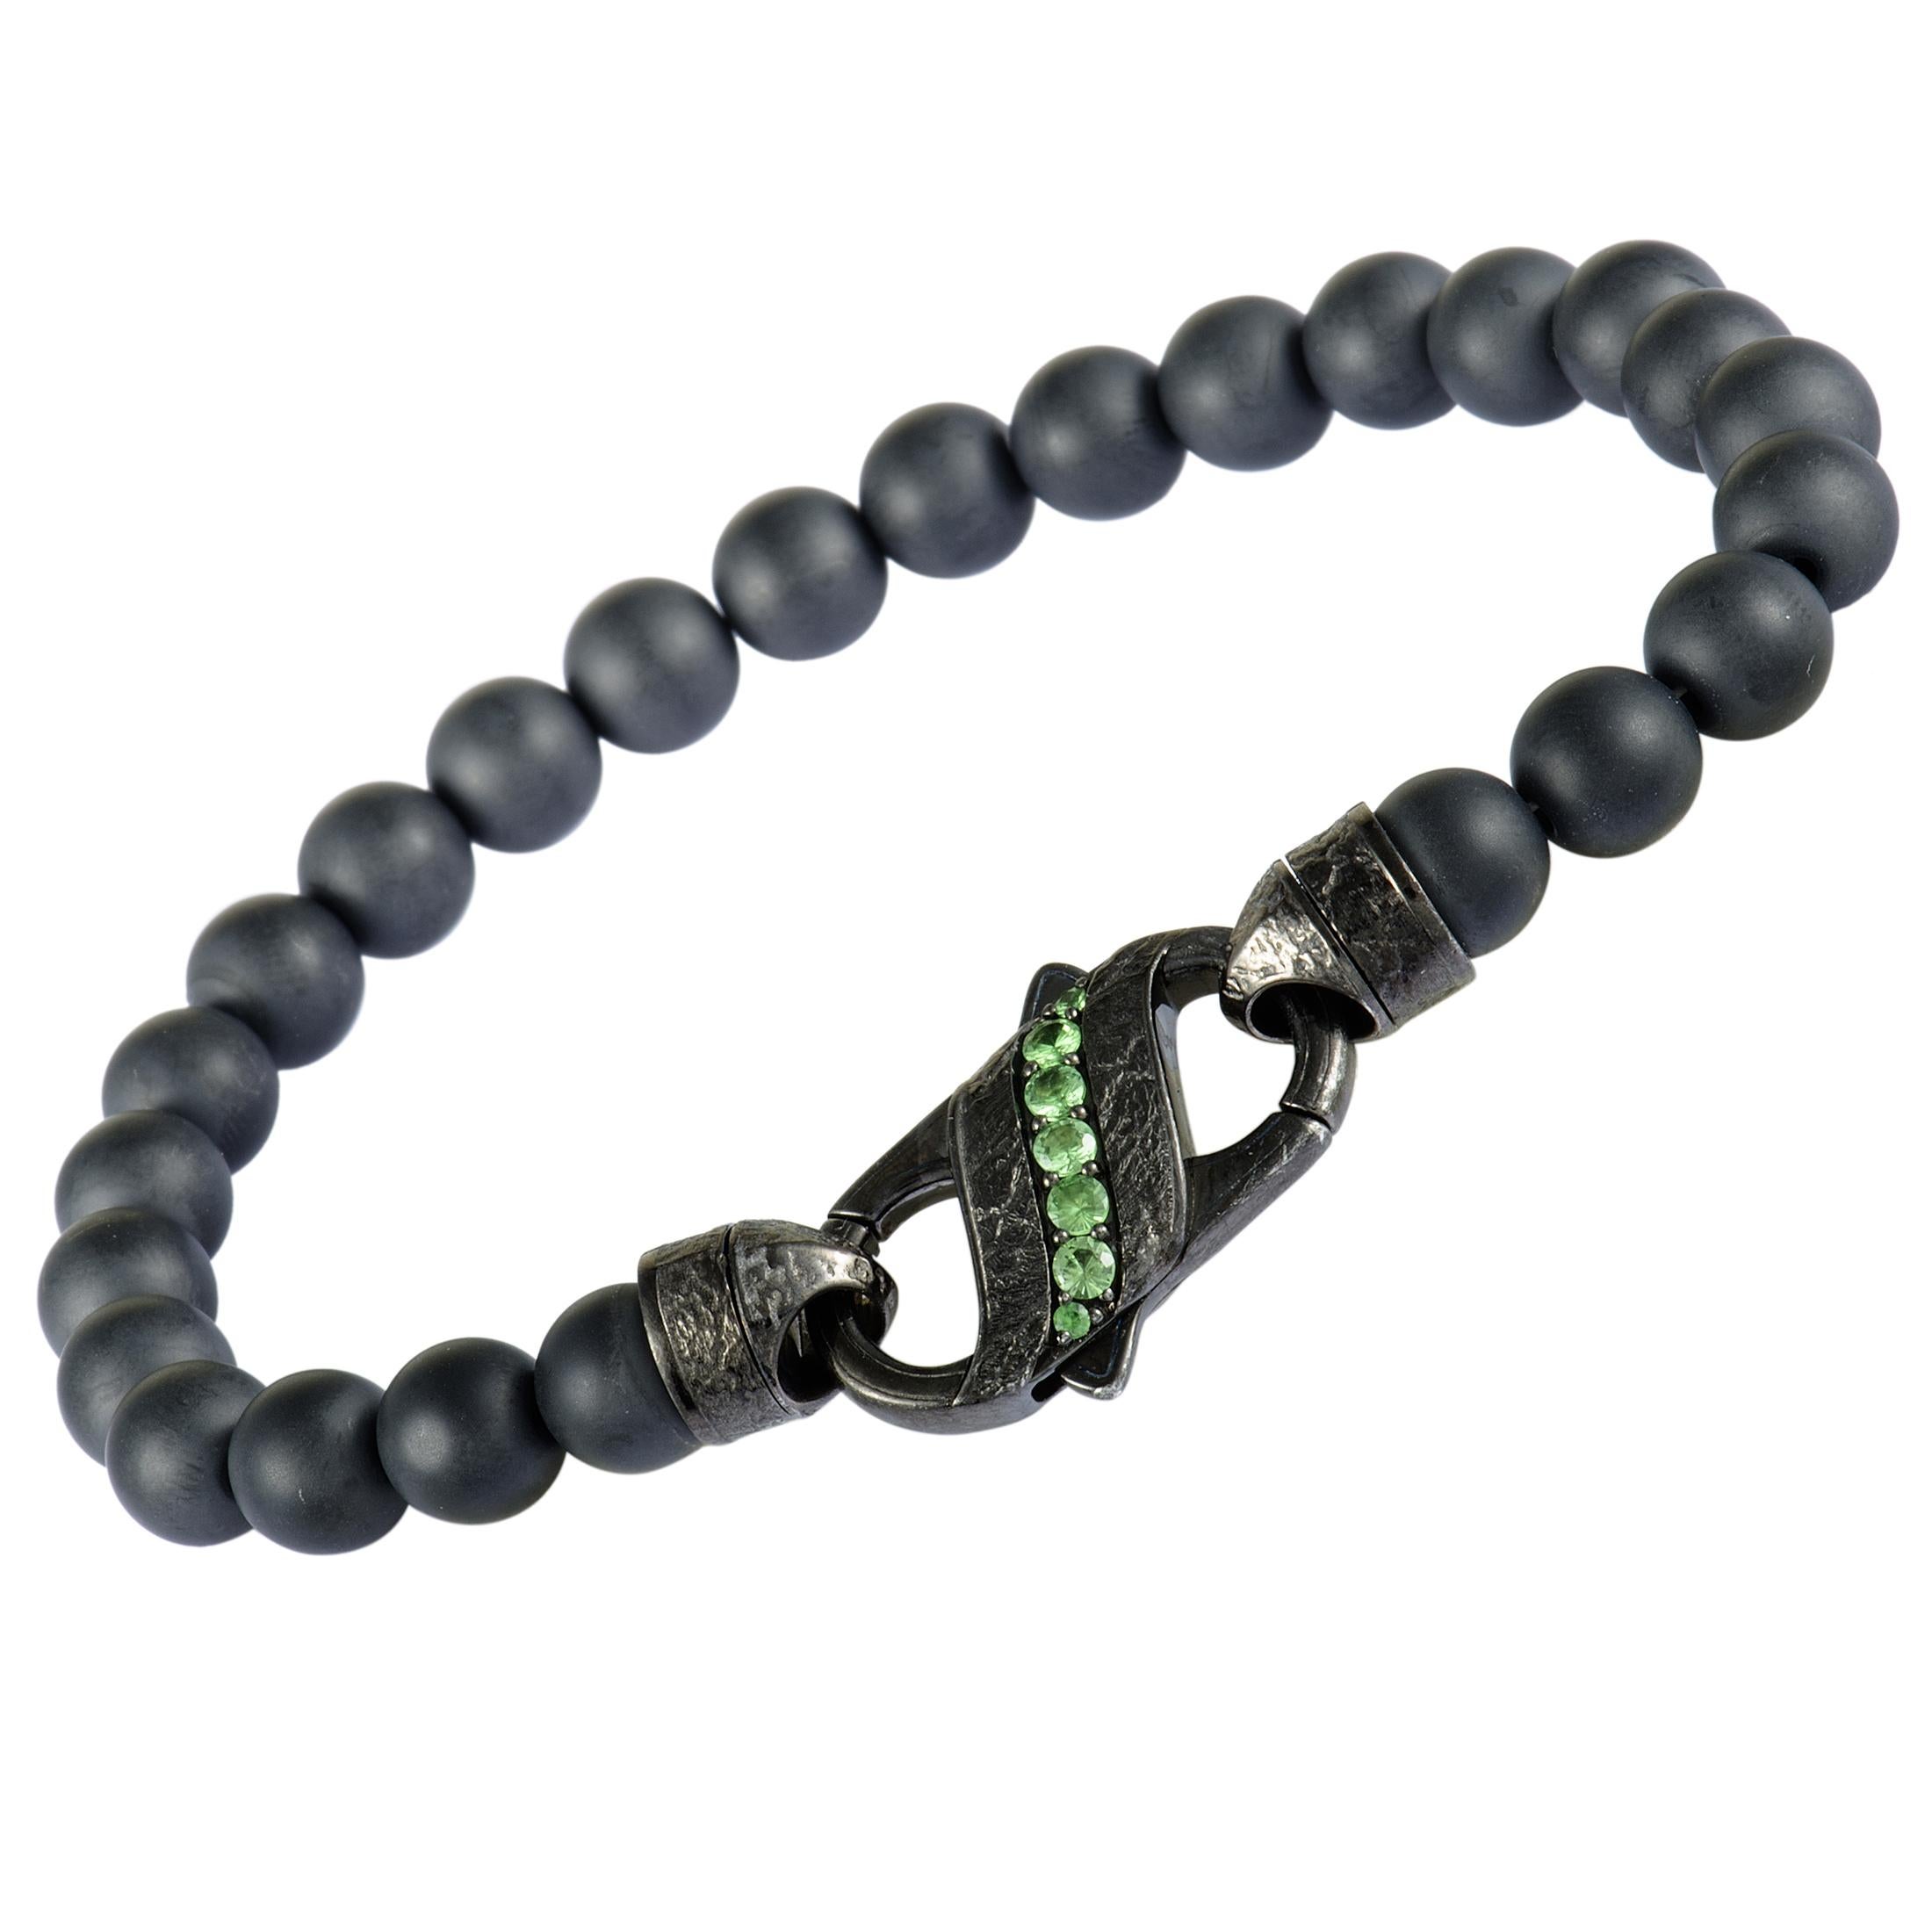 Stunningly crafted from black rhodium plated sterling silver, this chic England Made Me Ceramic pavè beaded men's bracelet by Stephen Webster is an elegant piece of accessory! The classy bracelet is embellished with 0.40ct of mesmerizing black